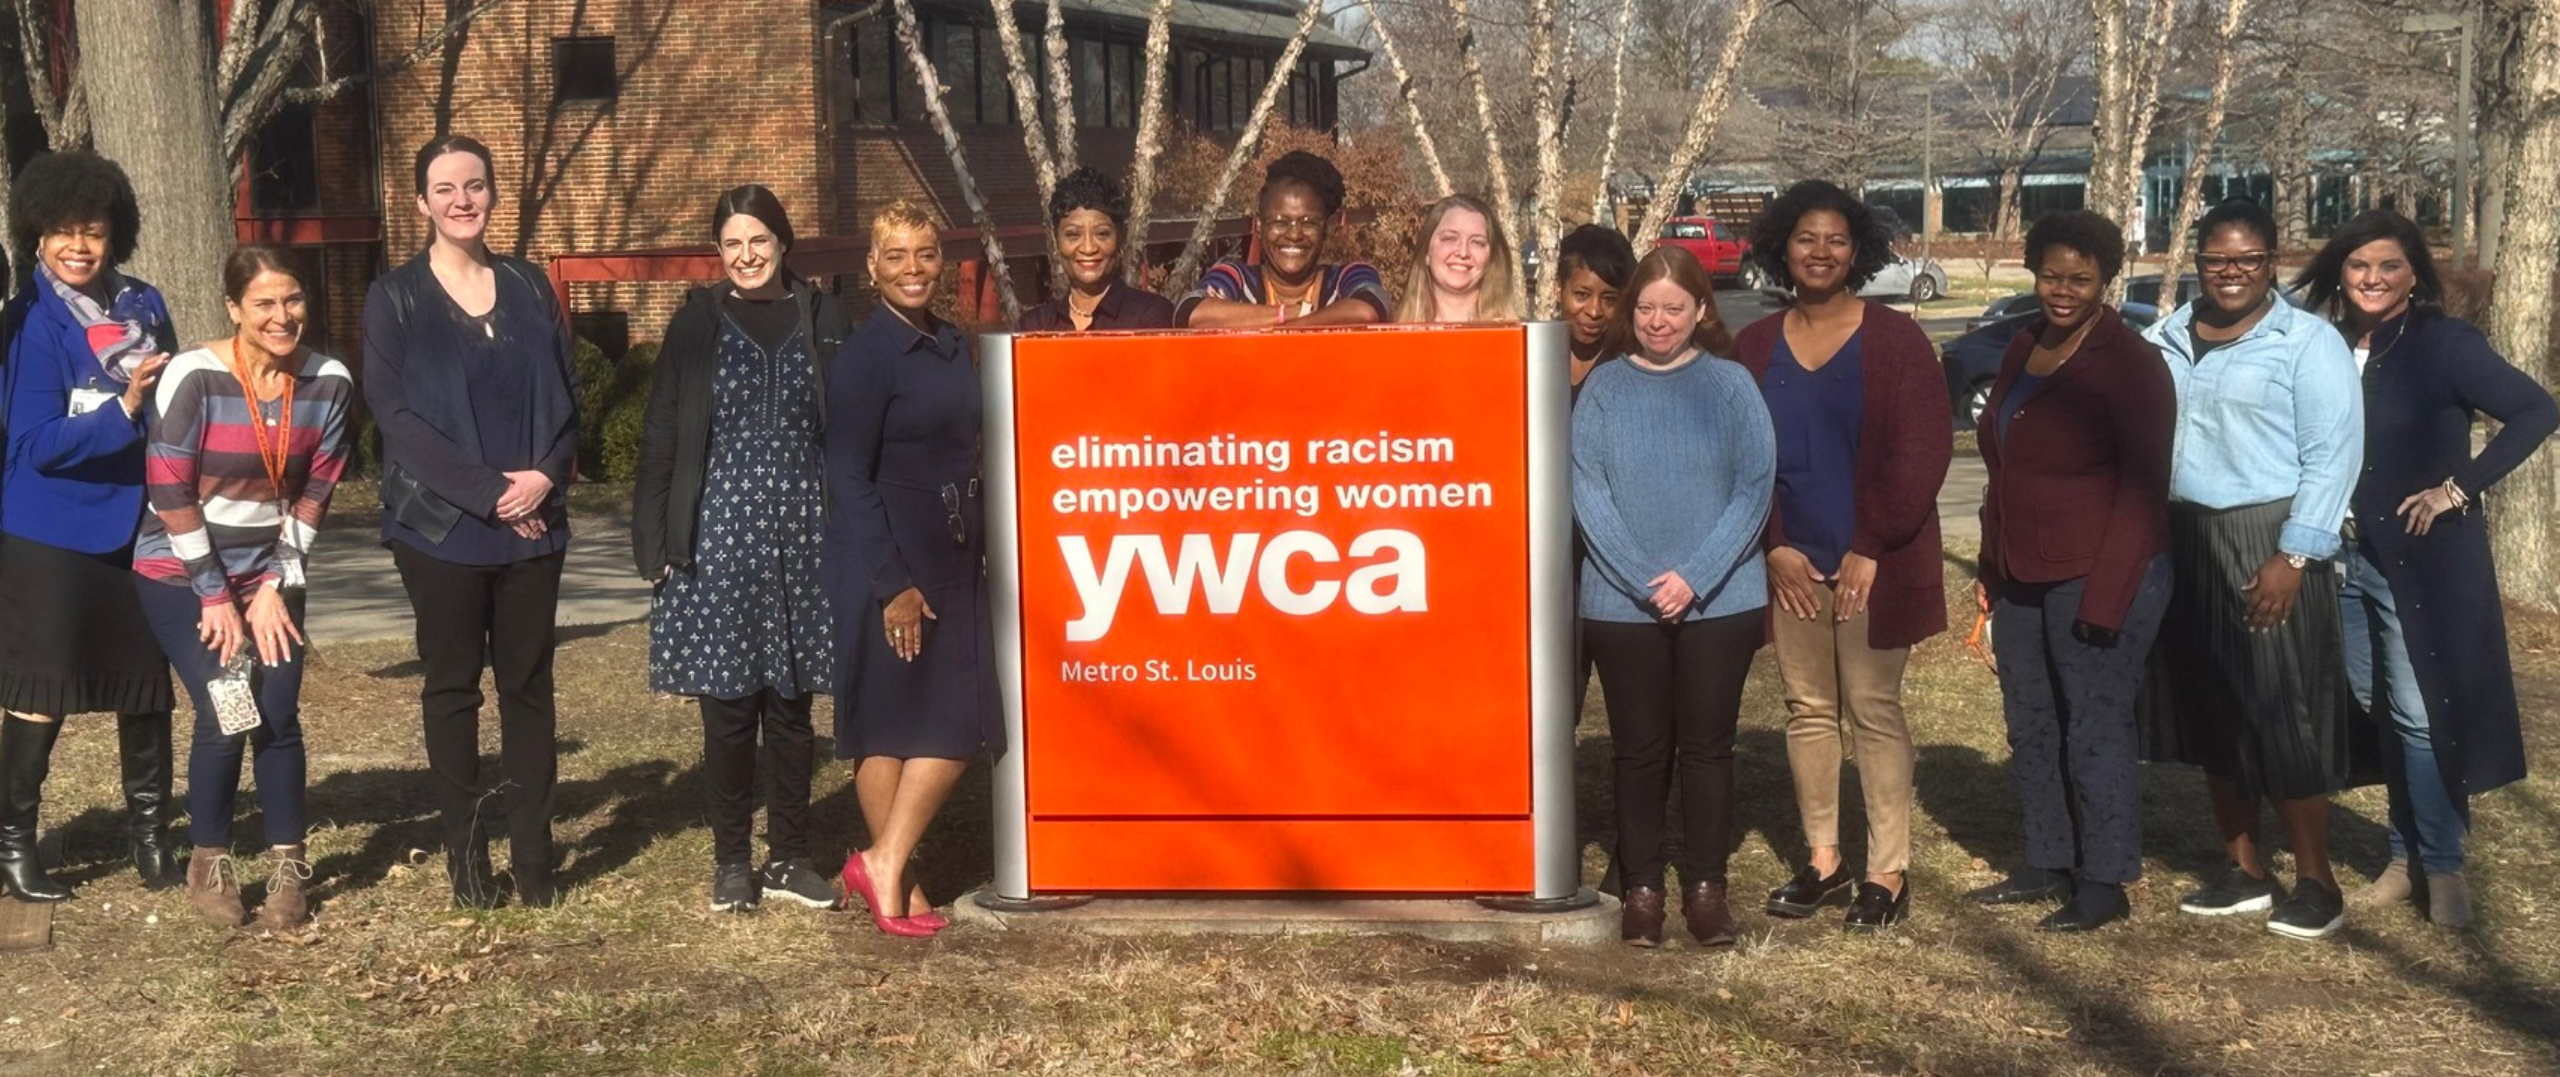 YWCA Staff wearing teal for April